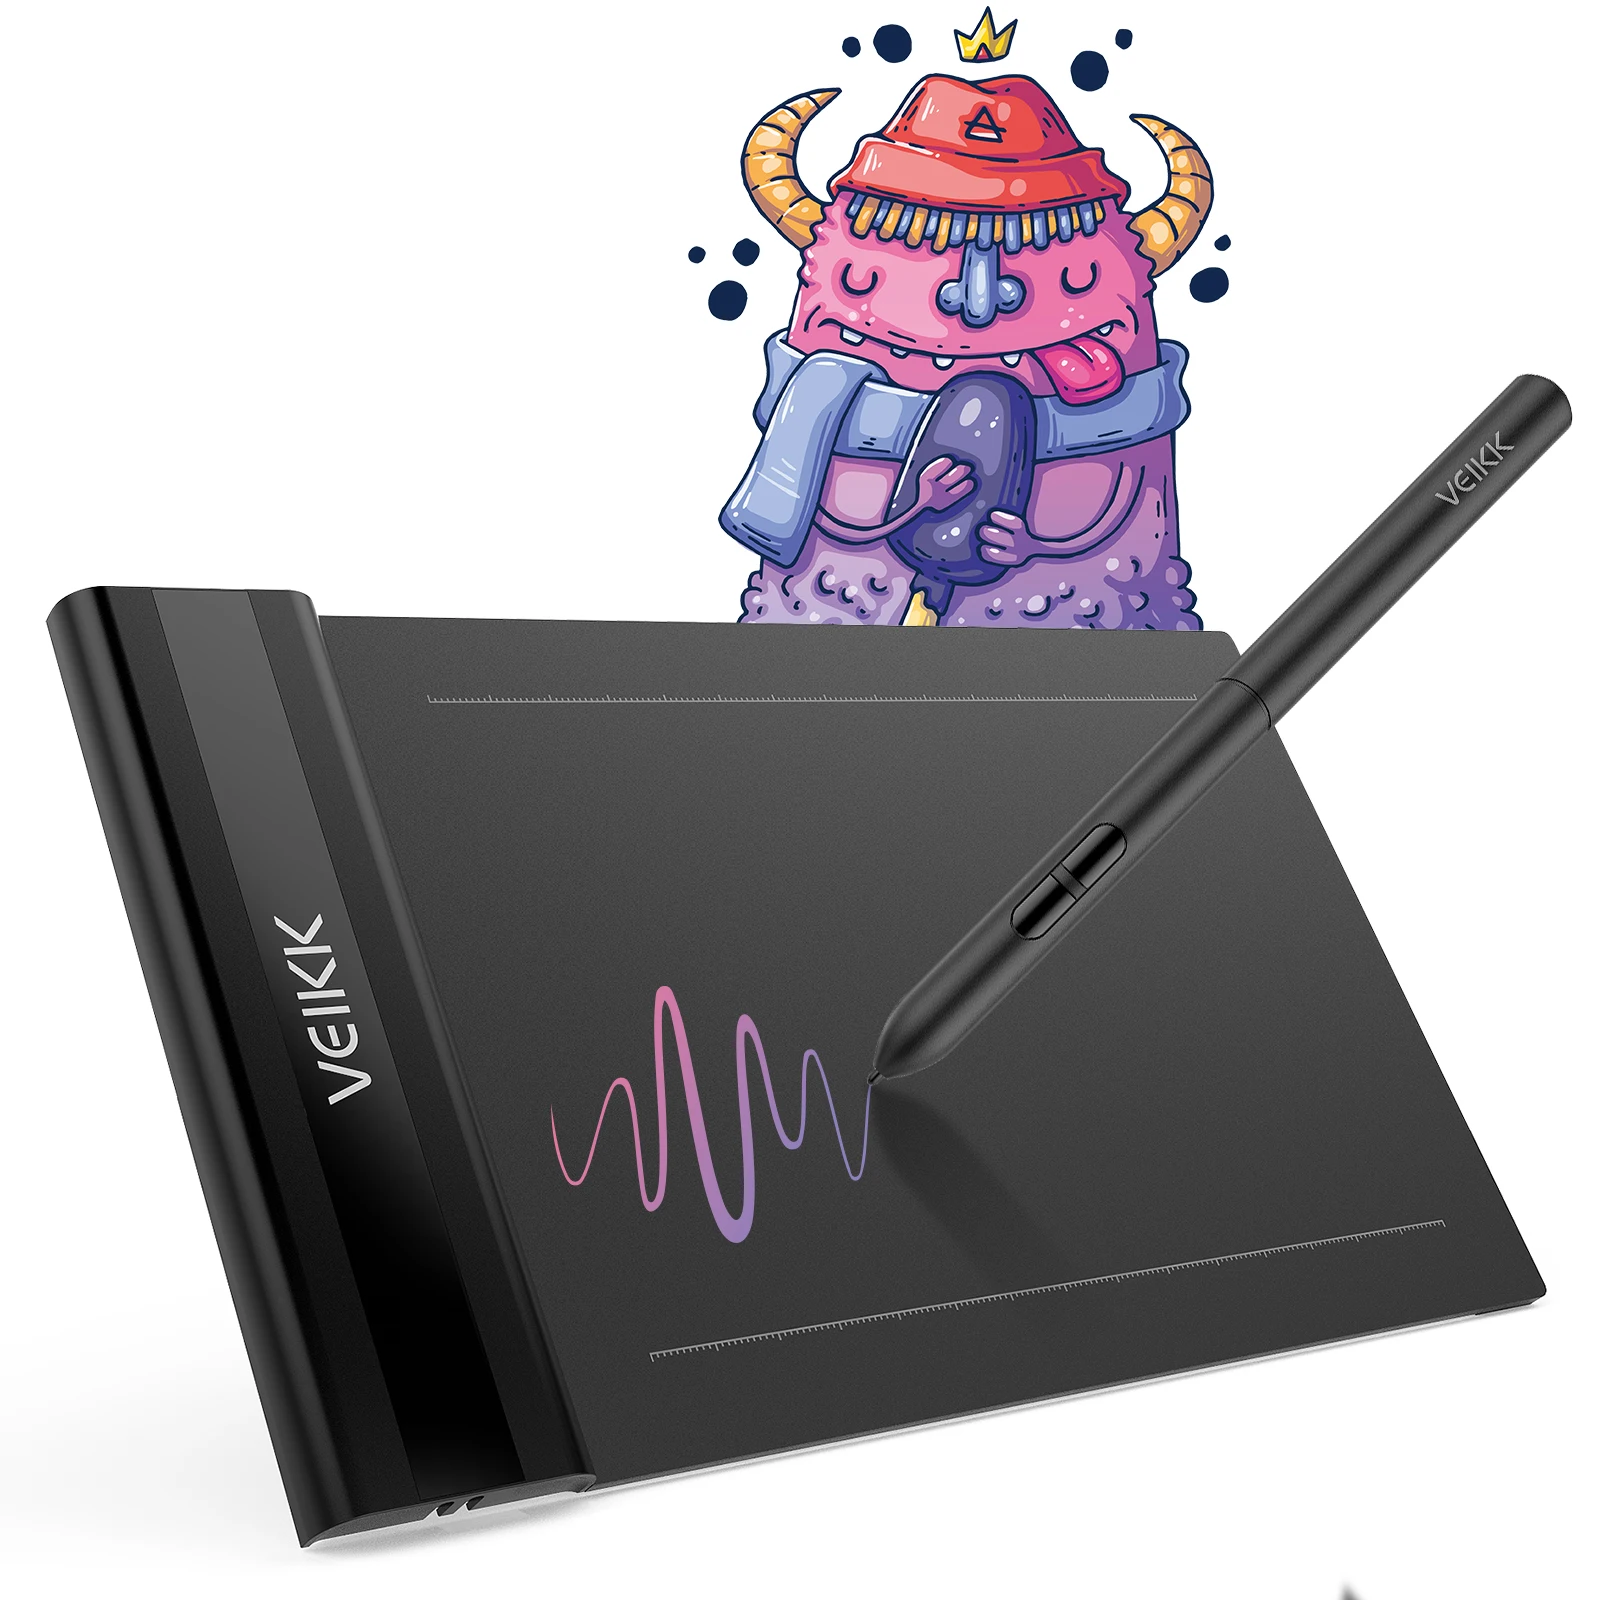 

VEIKK S640 6x4 Inch Graphics Digital Drawing Tablet 8192 Level Battery-Free Pen Support Android Windows Mac for Education OSU